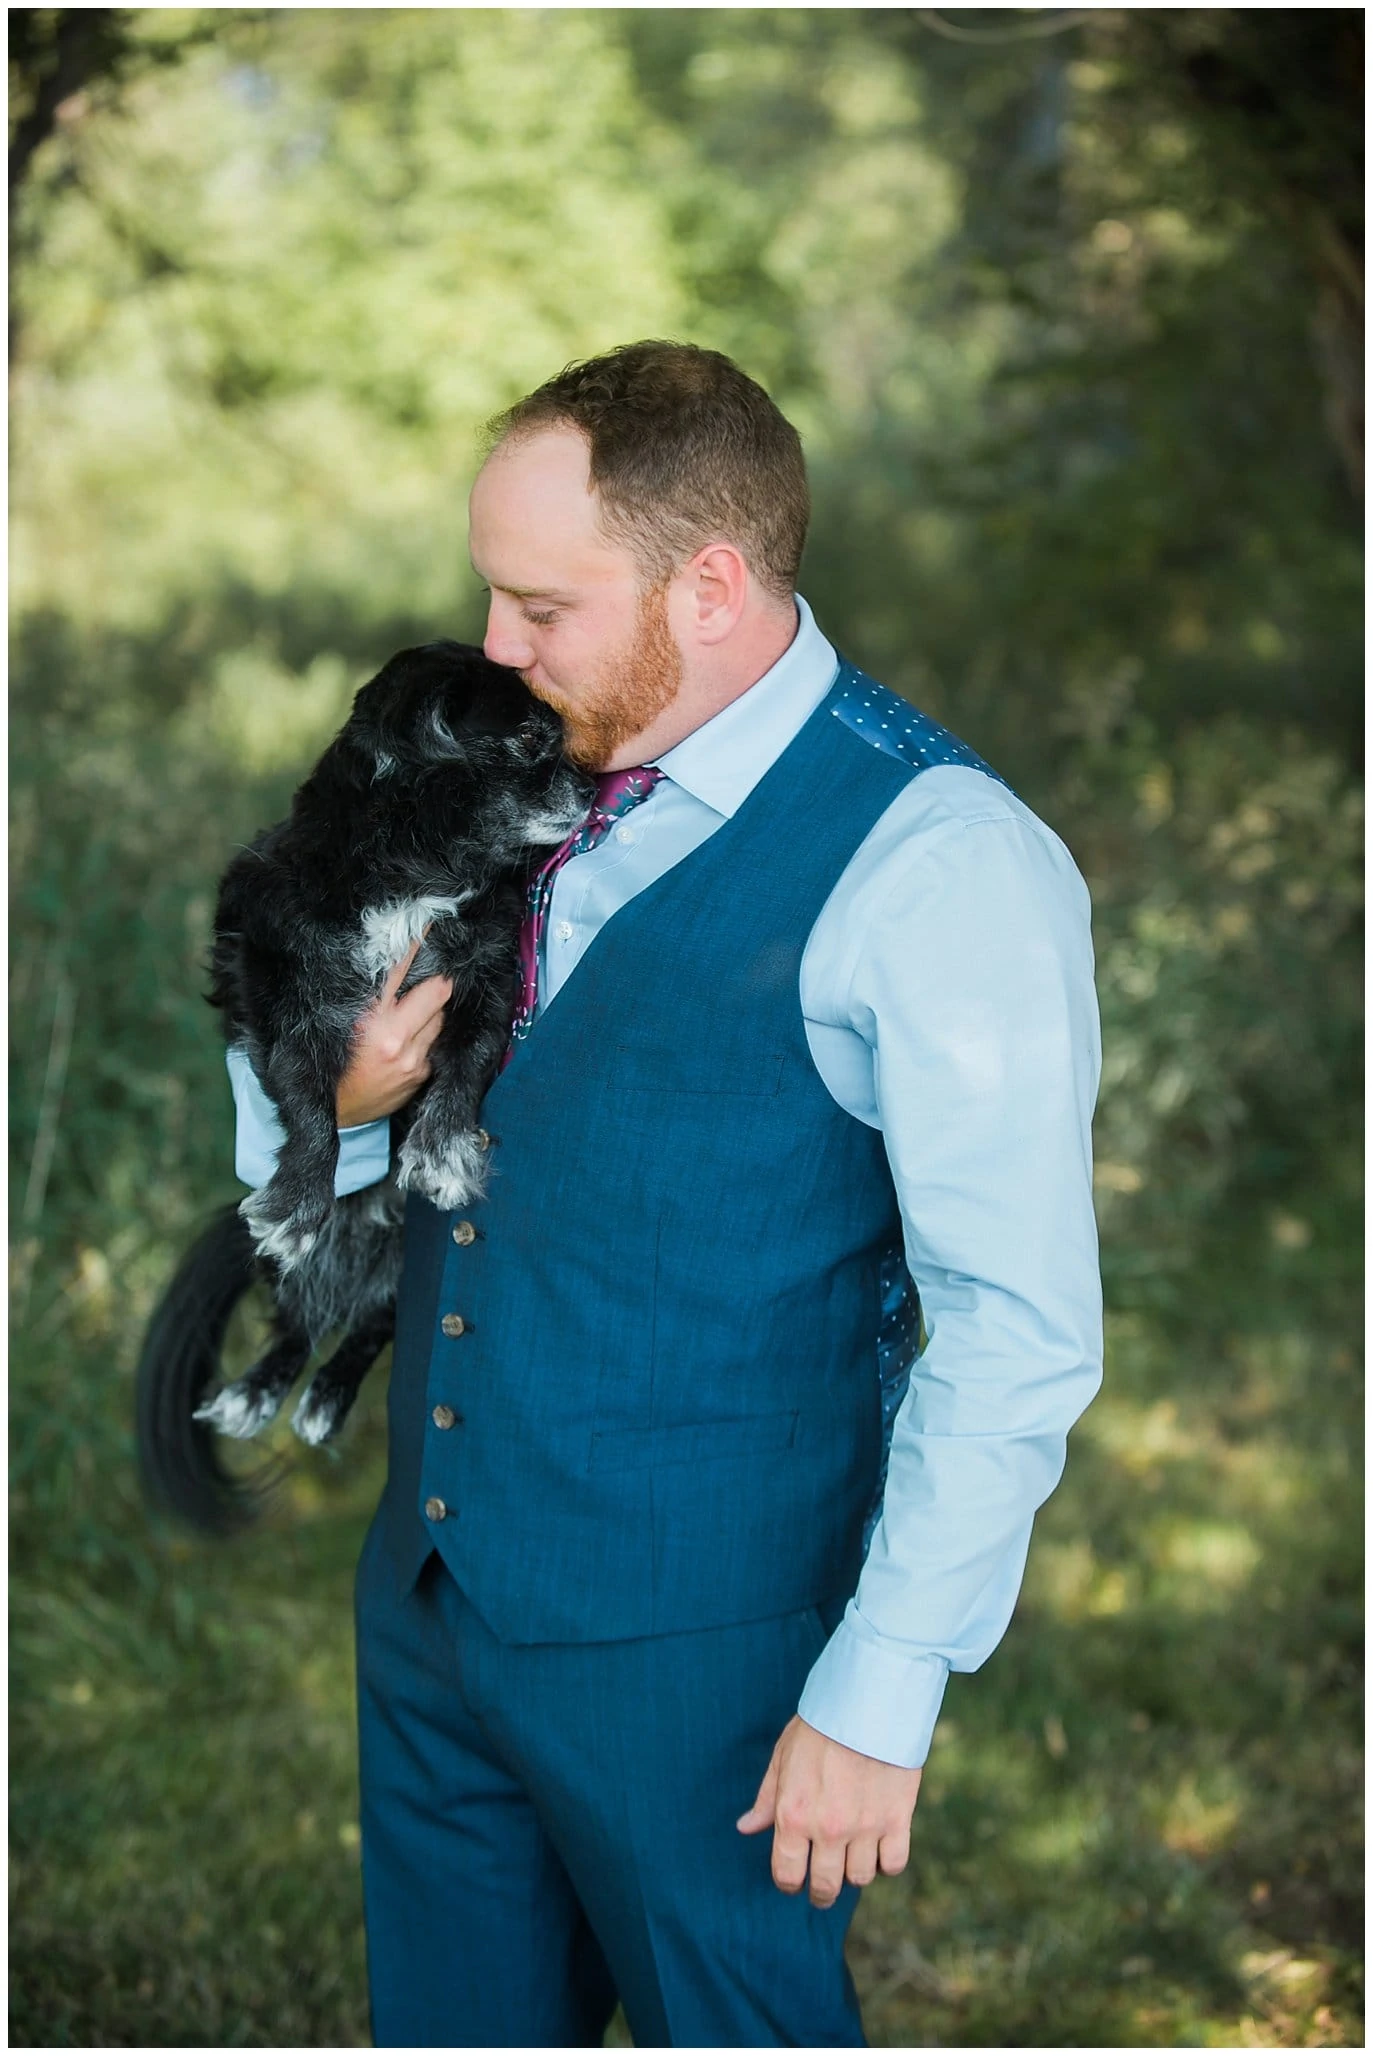 groom and dog at first look at Denver Botanic Gardens at Chatfield wedding by Boulder wedding photographer Jennie Crate photographer